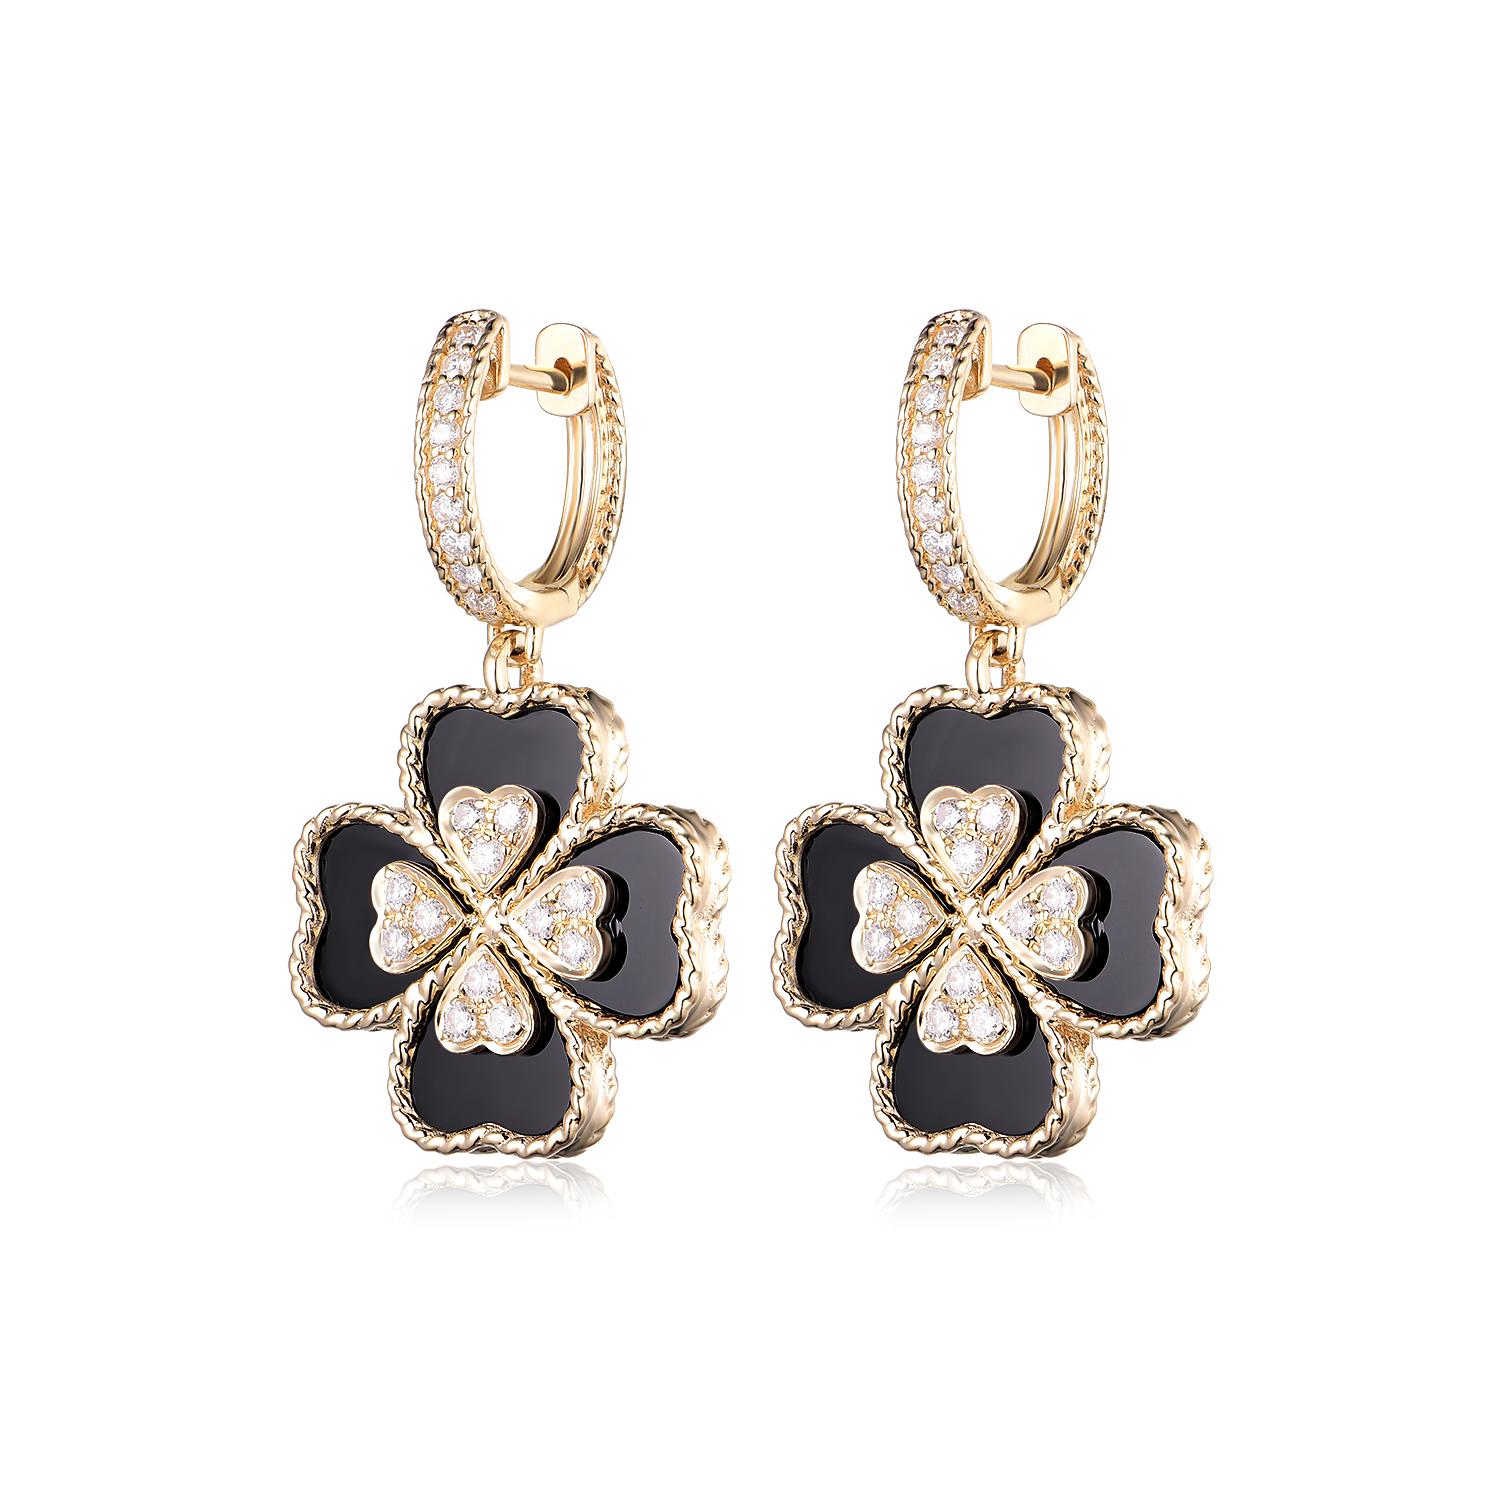 Elevate your style with these charming clover-shaped earrings, each showcasing the striking contrast between the deep black of 11.10 carats of polished onyx and the radiant sparkle of 0.78 carats of diamonds. The onyx, meticulously carved into the